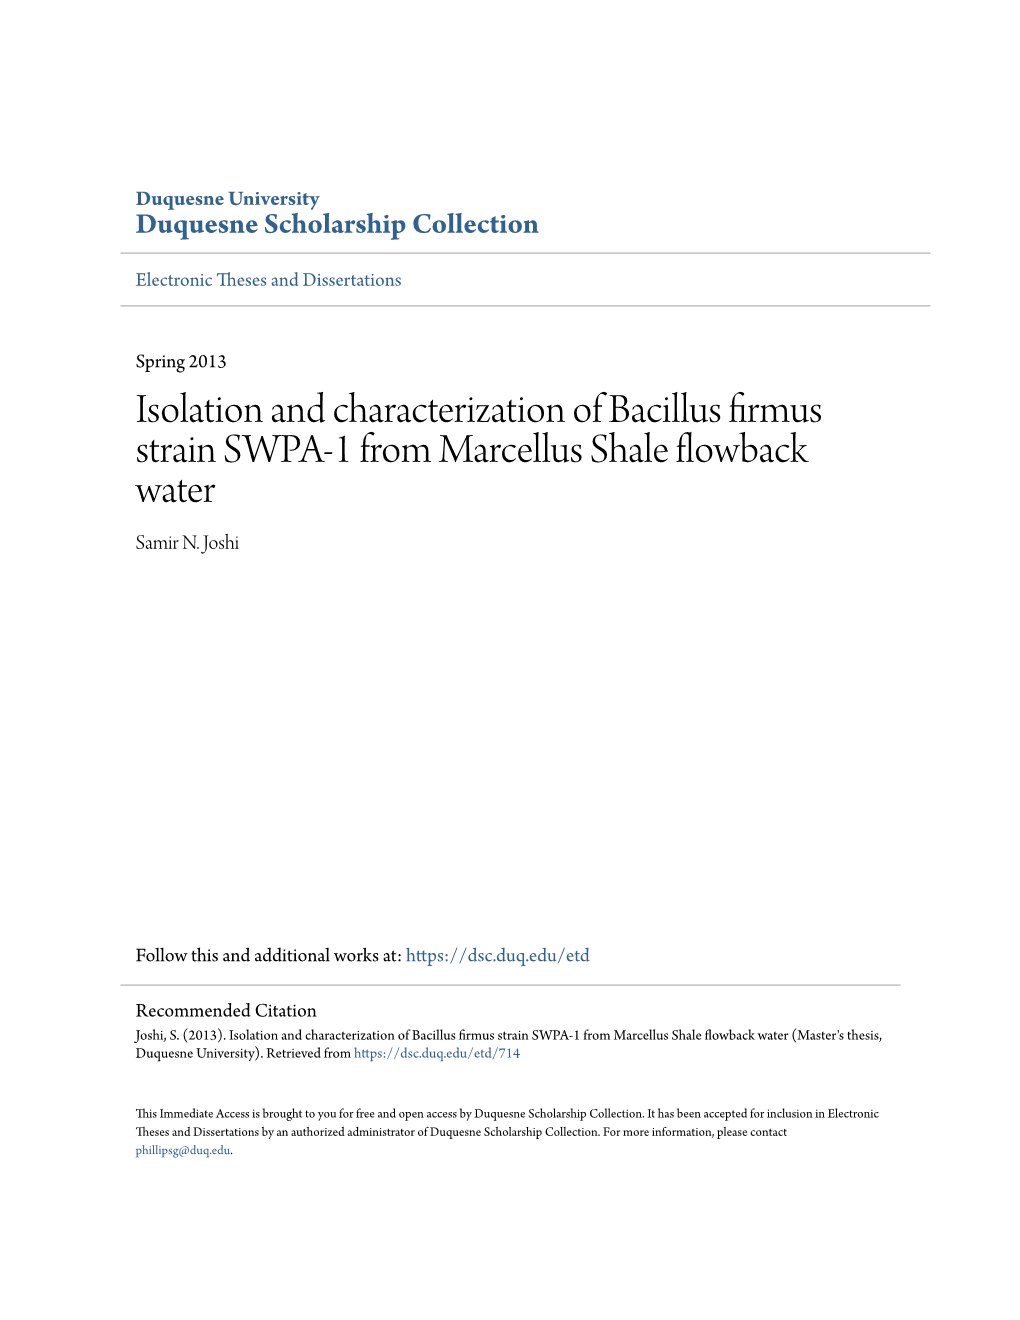 Isolation and Characterization of Bacillus Firmus Strain SWPA-1 from Marcellus Shale Flowback Water Samir N